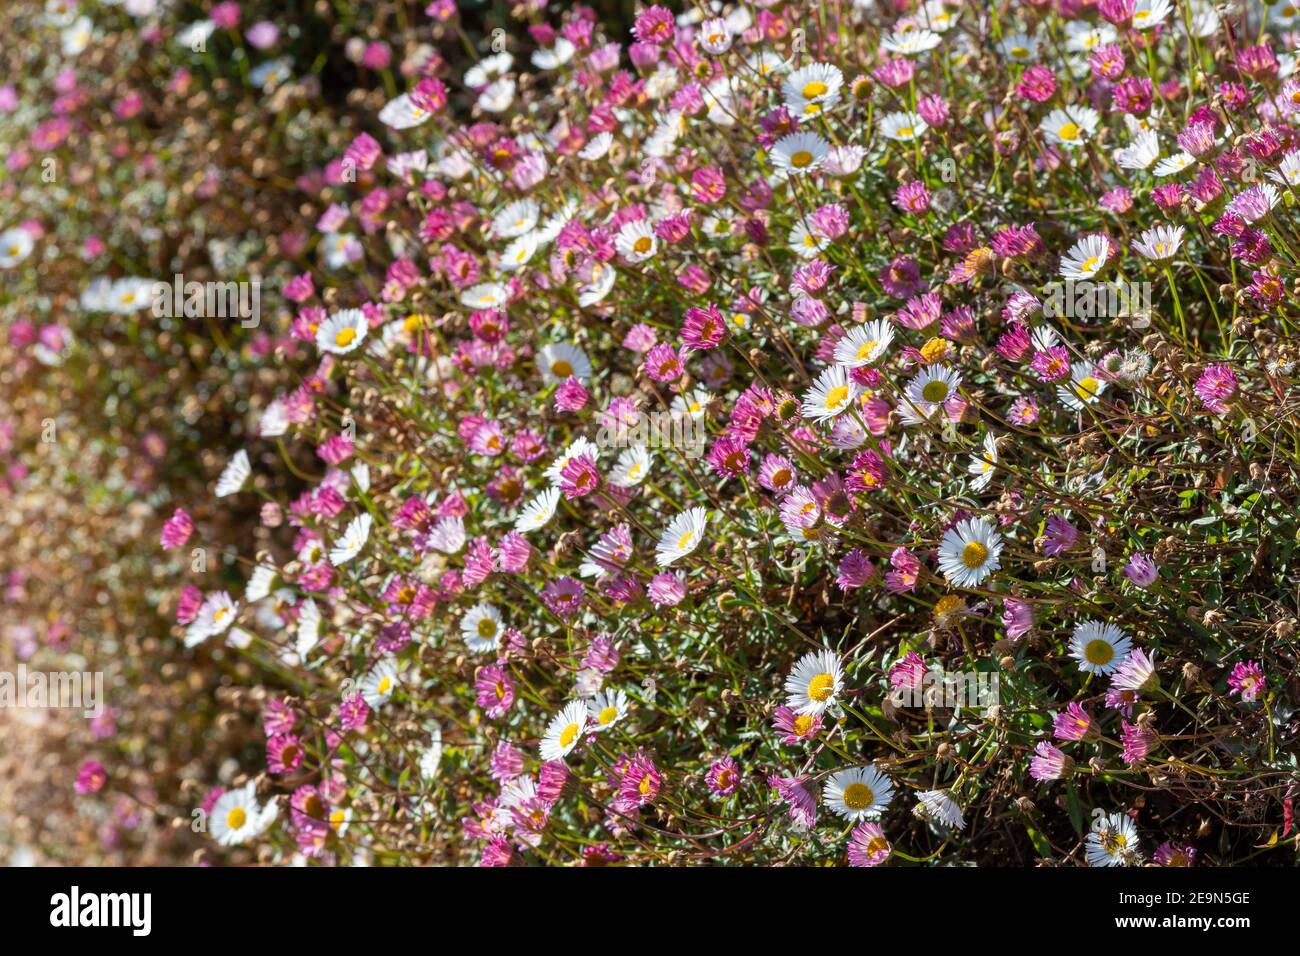 Spanish daisies (erigeron karvinskianus) growing out of a wall Stock Photo